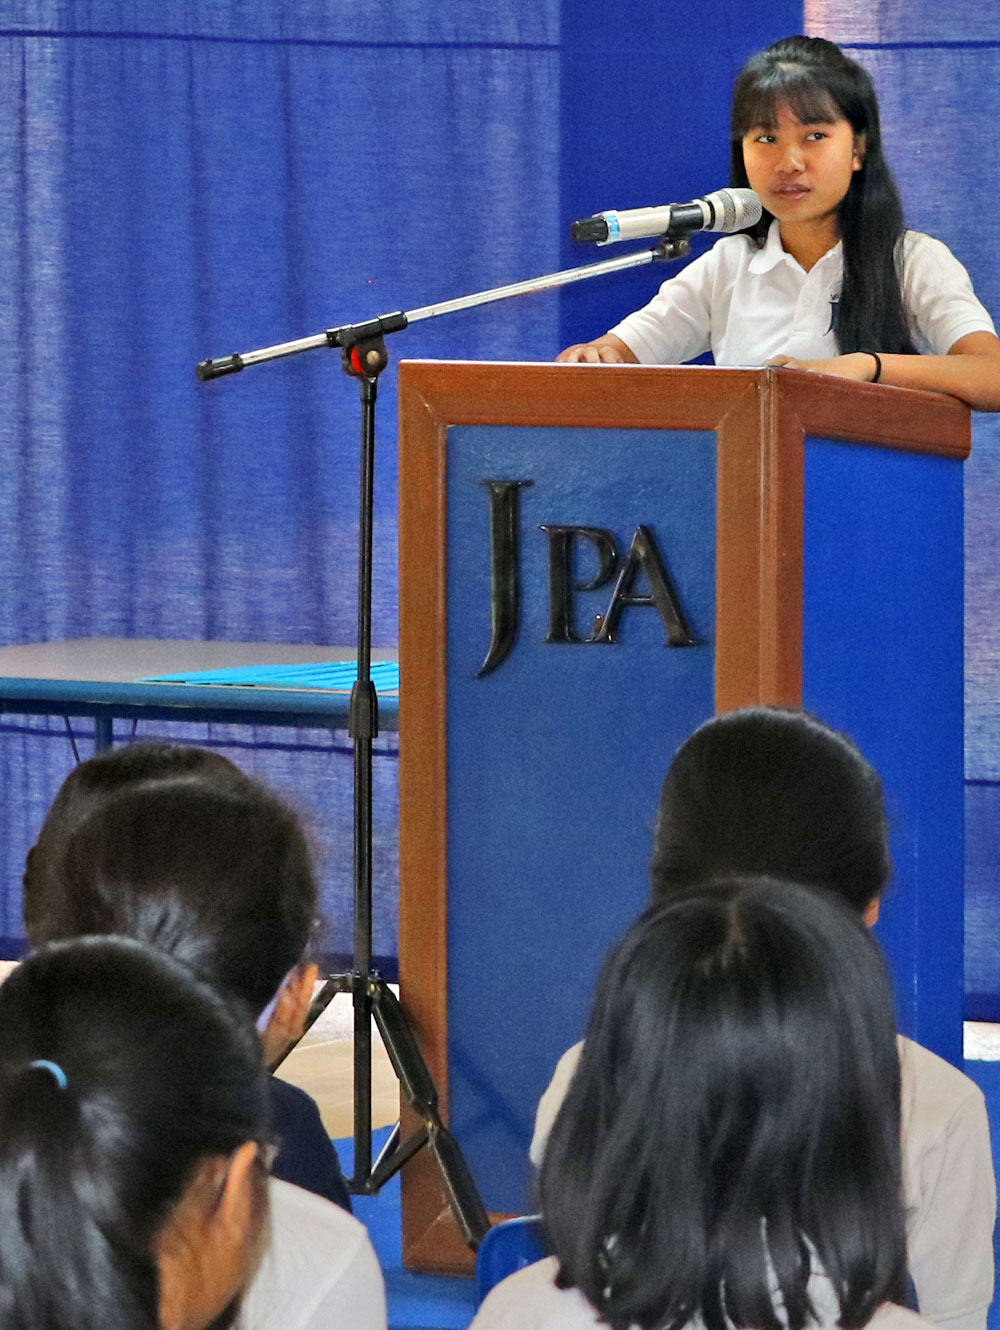 JPA student Sengly ’23 speaking eloquently about facing her fears when public speaking - Honors Assembly. Jay Pritzker Academy, Siem Reap, Cambodia. Jay-Pritzker-Academy-Siem-Reap-Cambodia.